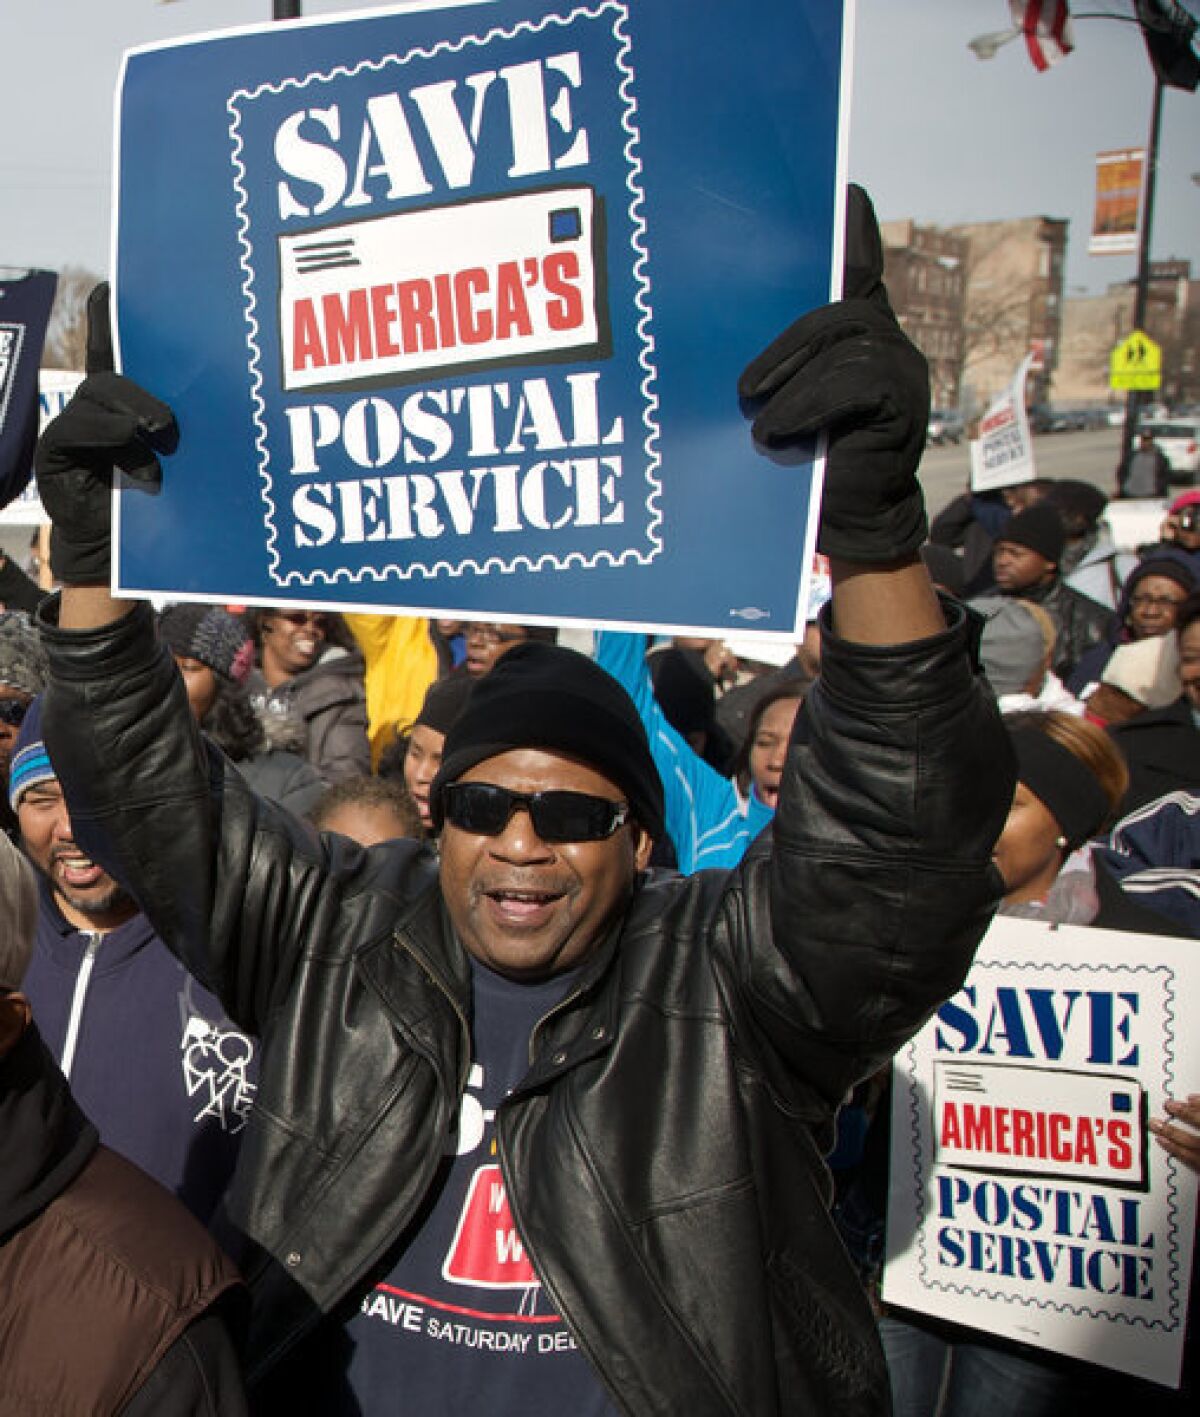 Postal workers in Chicago rally in support of keeping Saturday mail delivery, which the U.S. Postal Service plans to discontinue as a cost-cutting move.